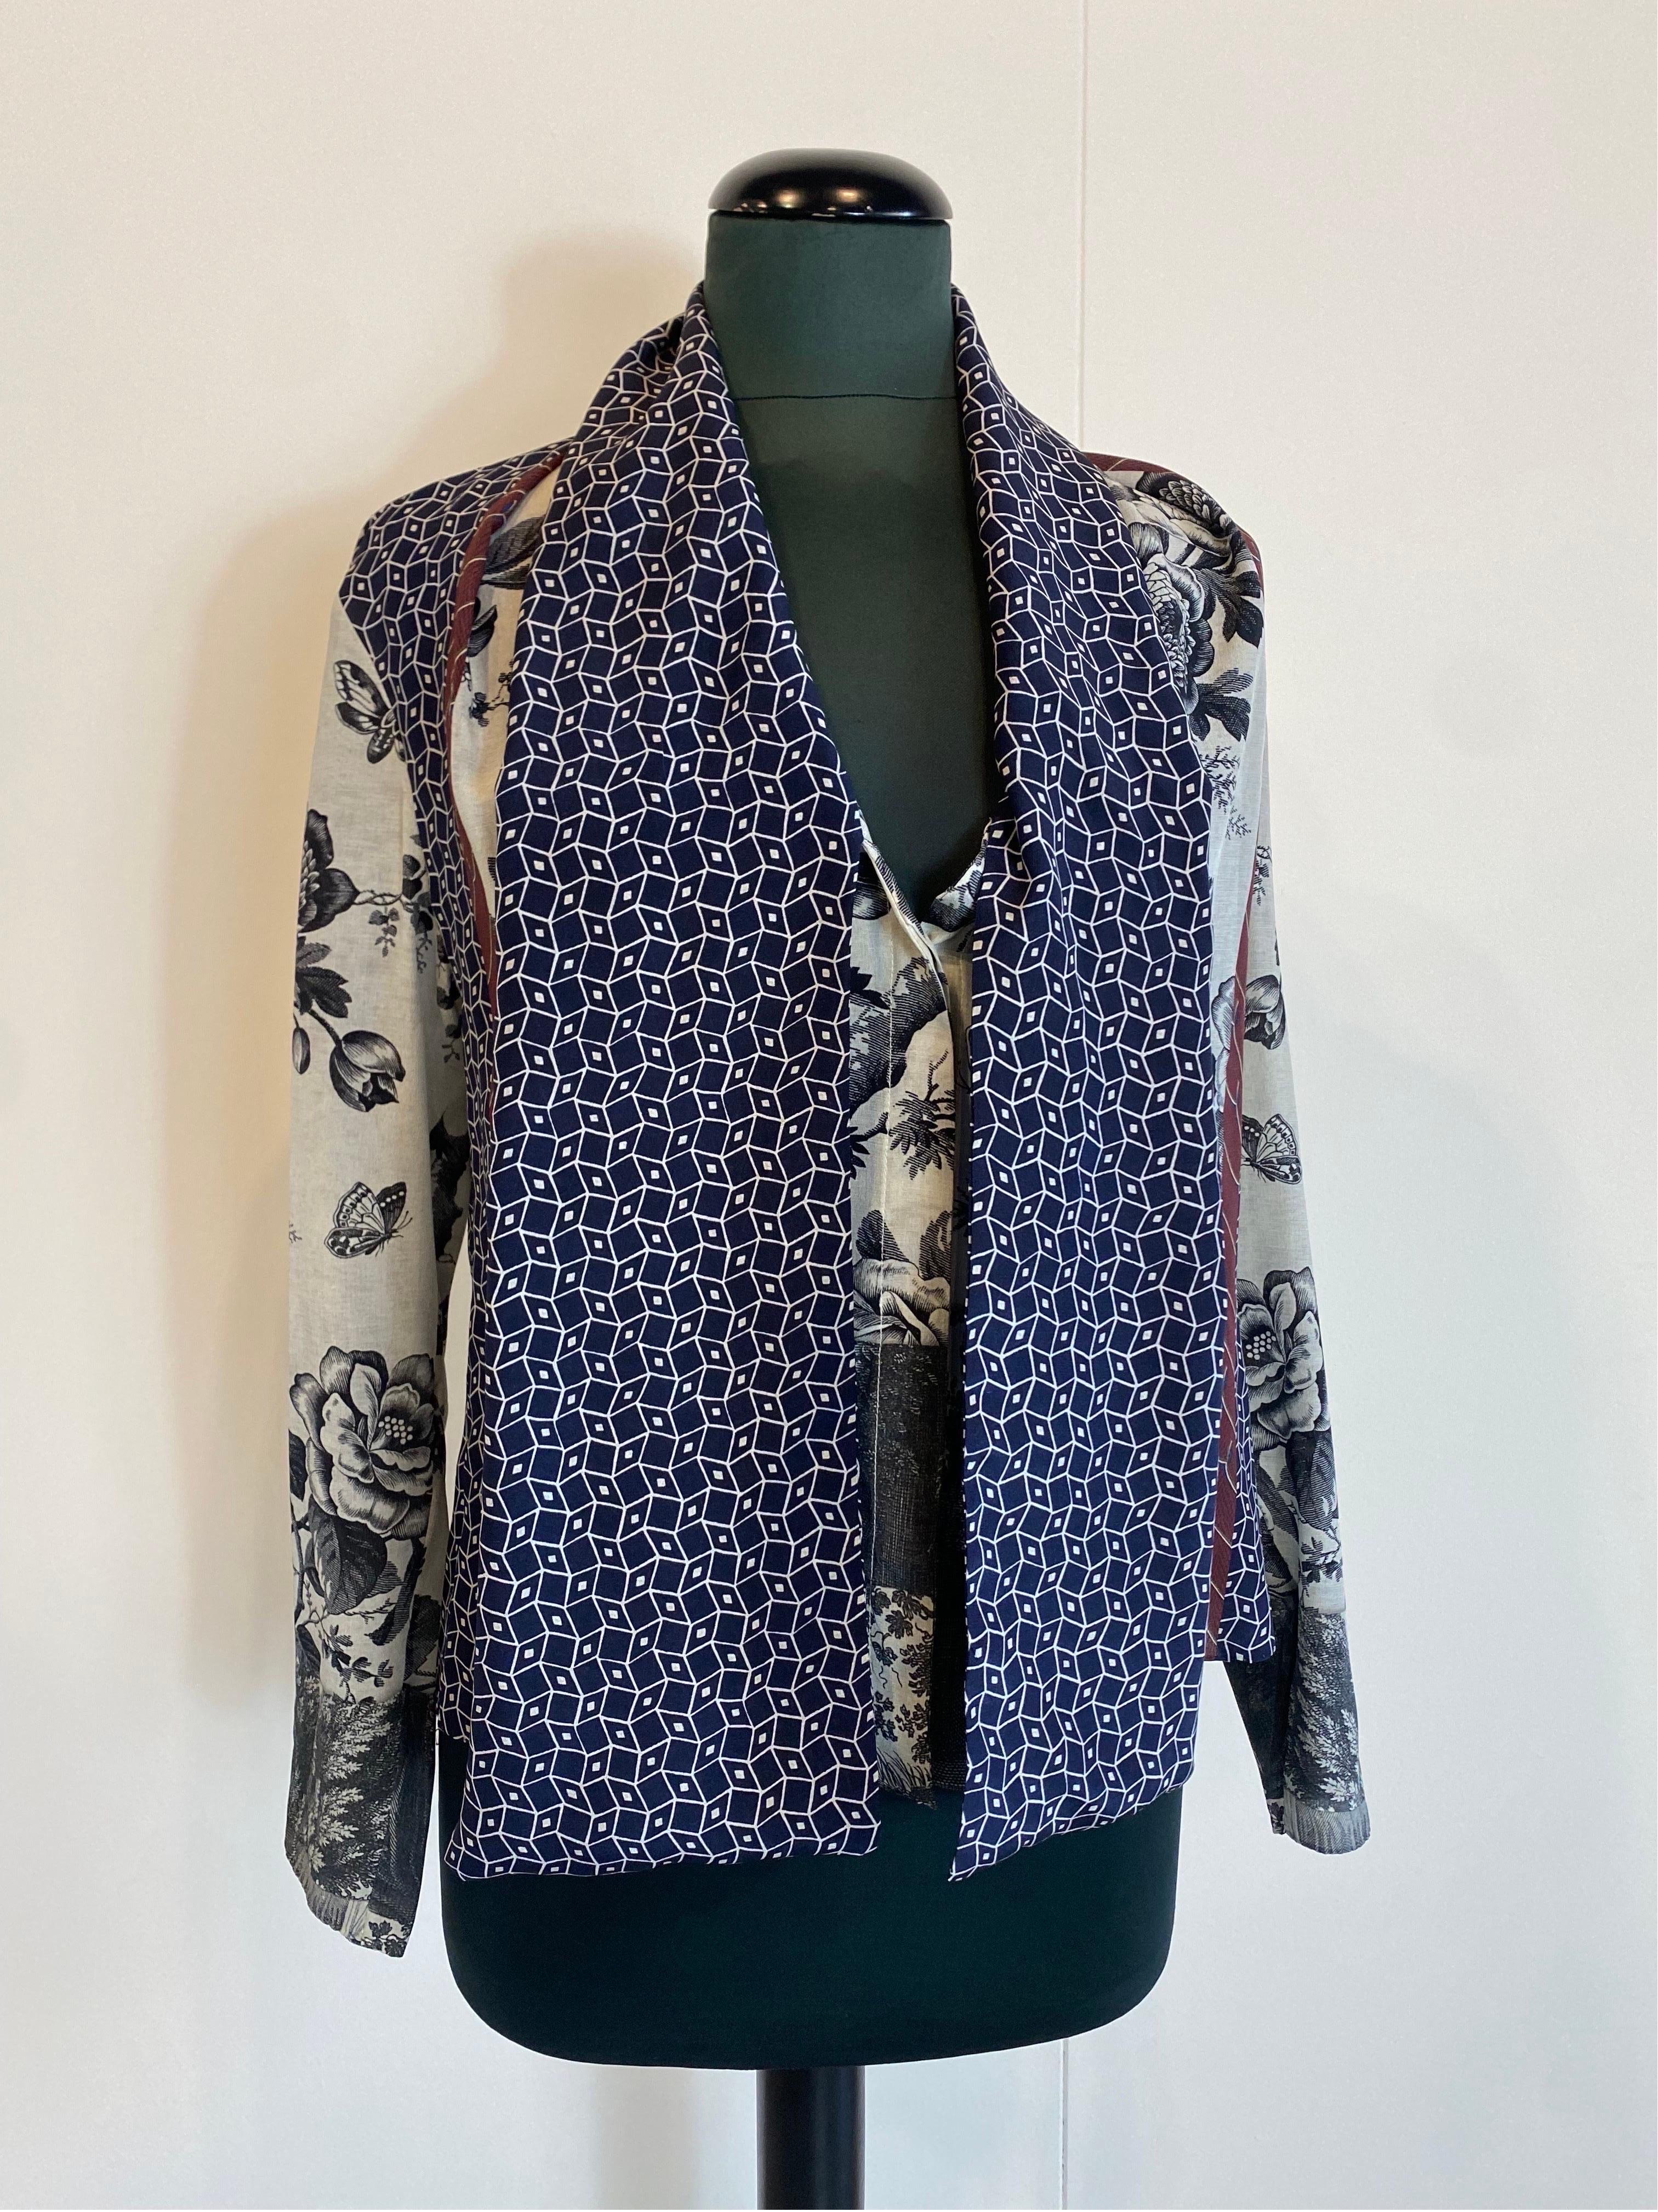 In silk. With a patterned blue scarf that can be tied or left loose.
With tag. Like new.
With buttons.
International size S.
Shoulders 45
Length 52
Sleeve length 55
Bust 50